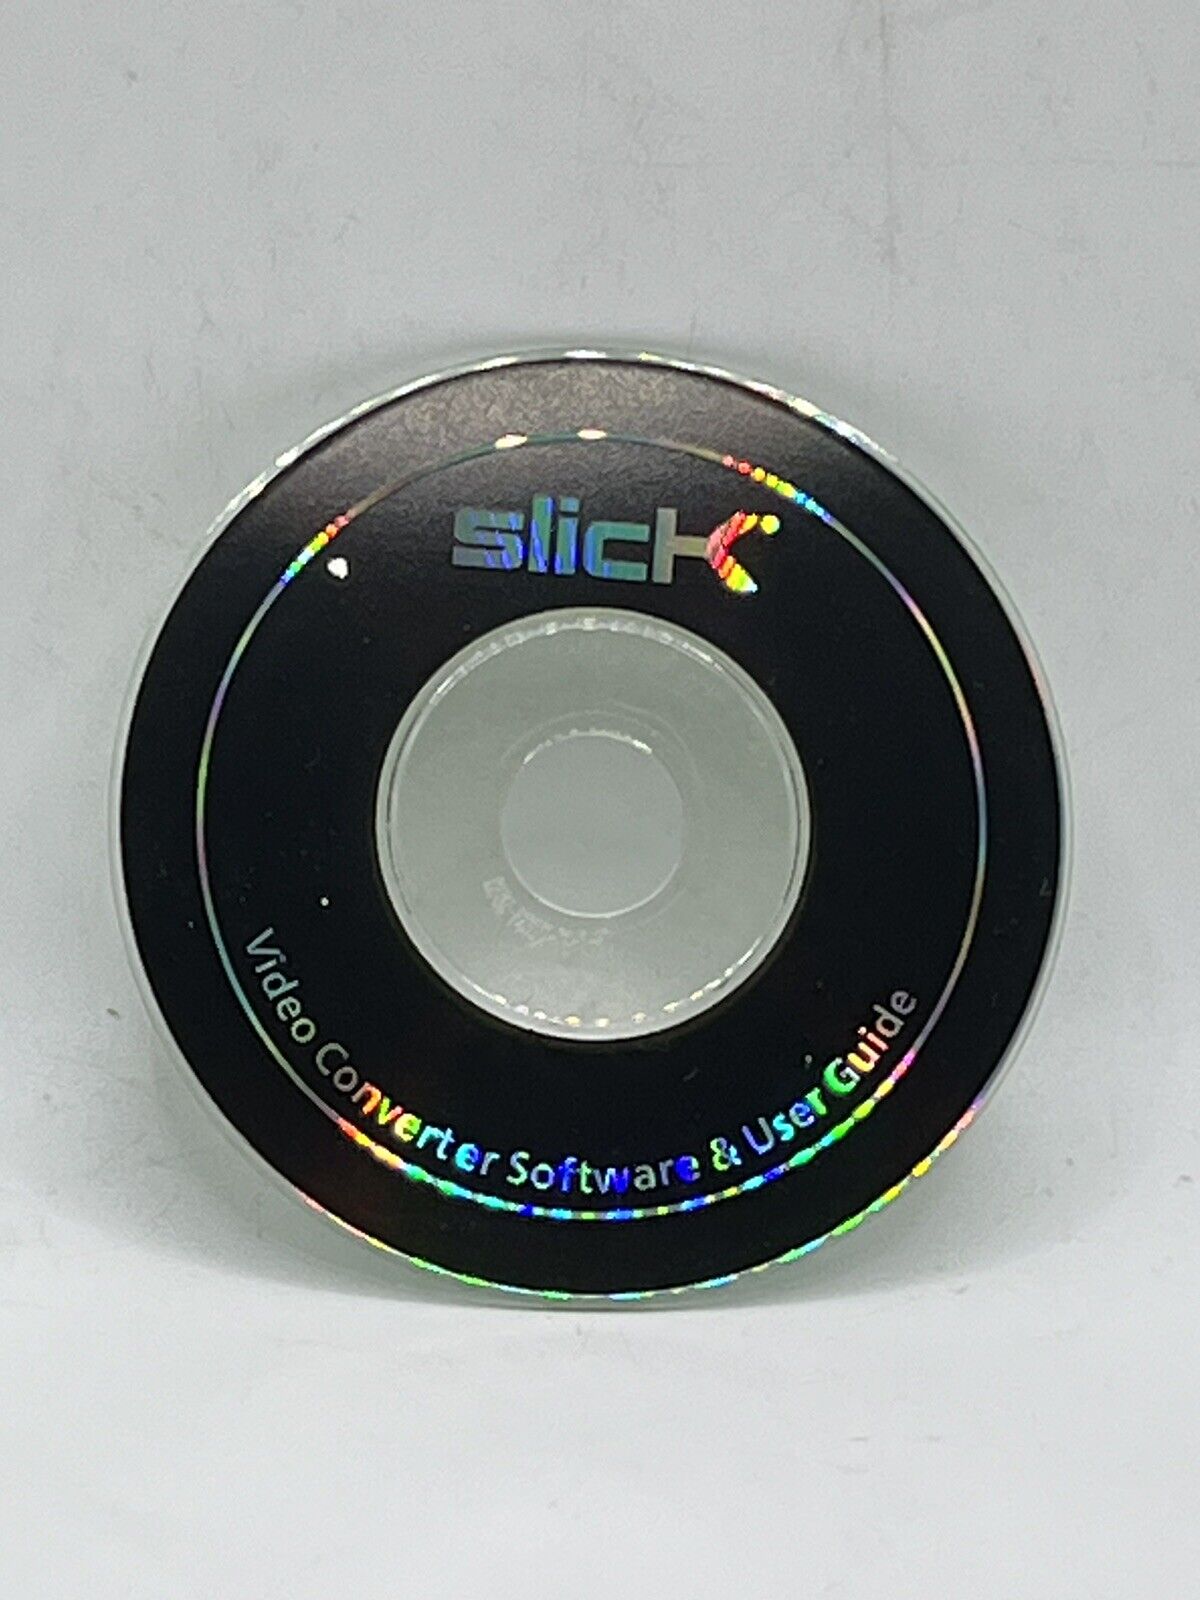 SLICK VIDEO CONVERTER Software & User Guide DISC Only @@UNSURE WHAT THIS IS FOR@